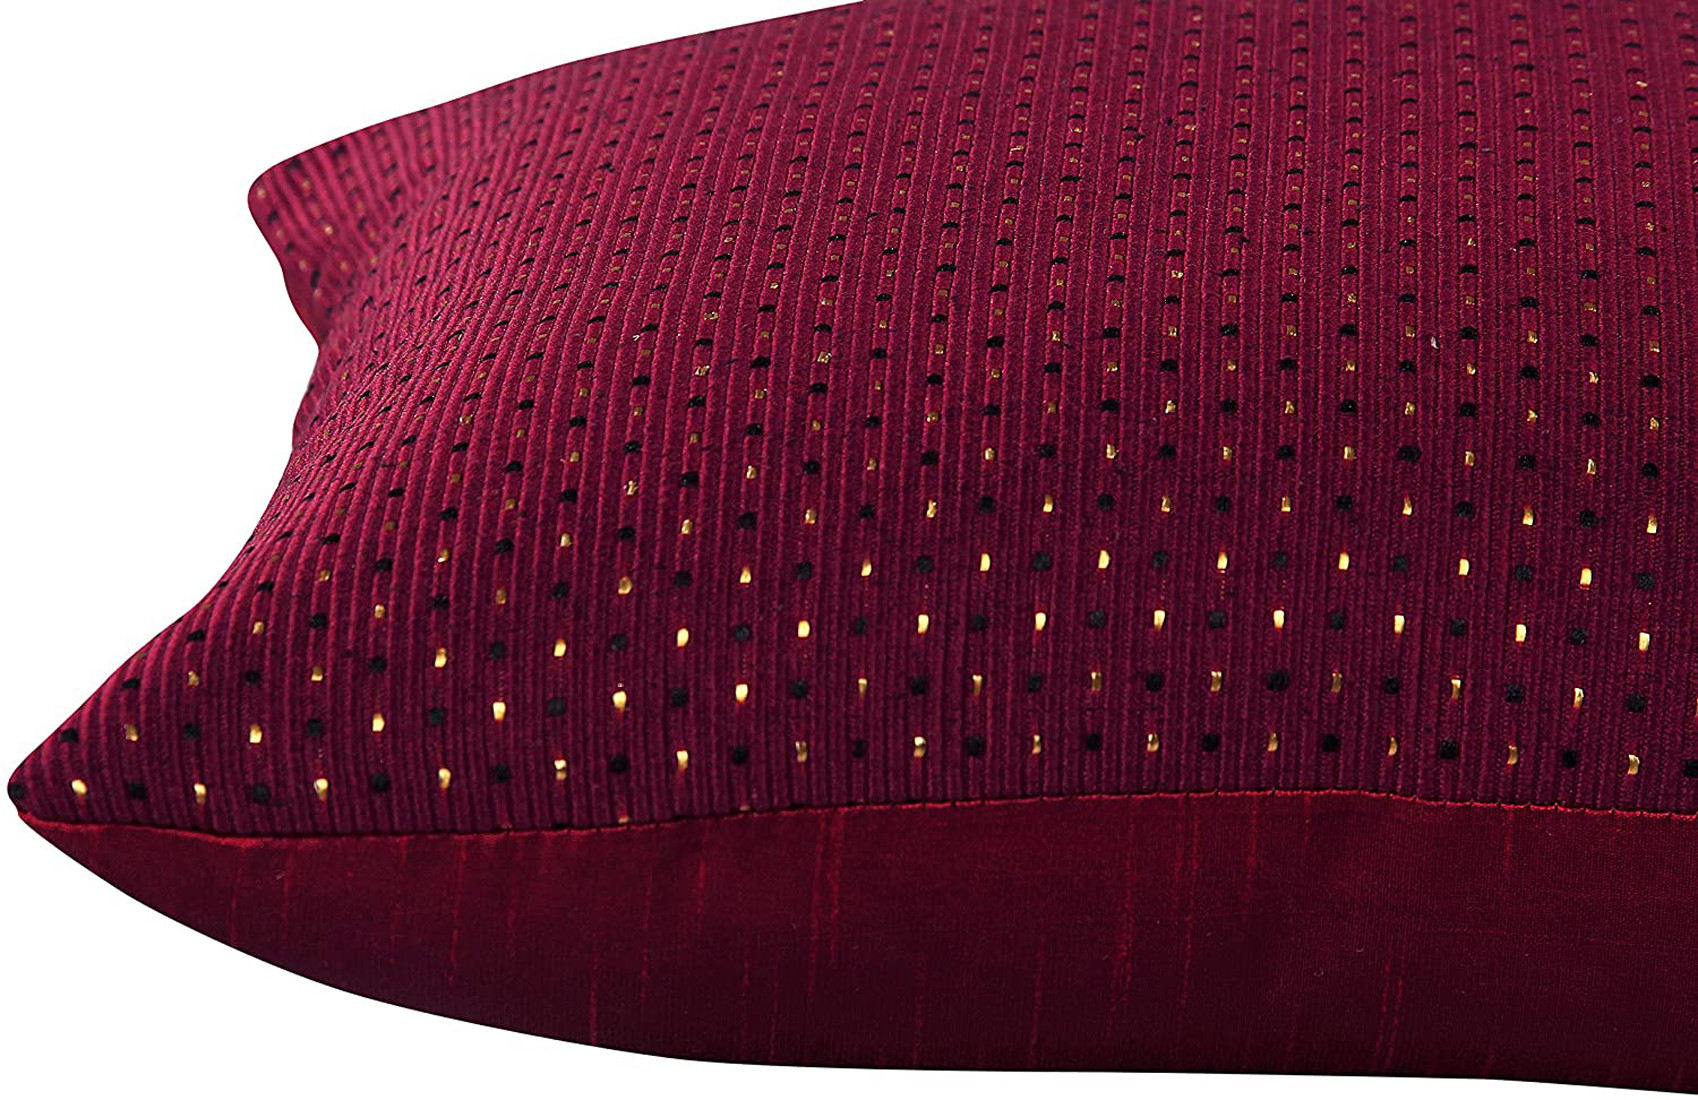 Kuber Industries Velvet Dot Printed Soft Decorative Square Throw Pillow Cover, Cushion Covers, Pillow Case For Sofa Couch Bed Chair 16x16 Inch-(Maroon)